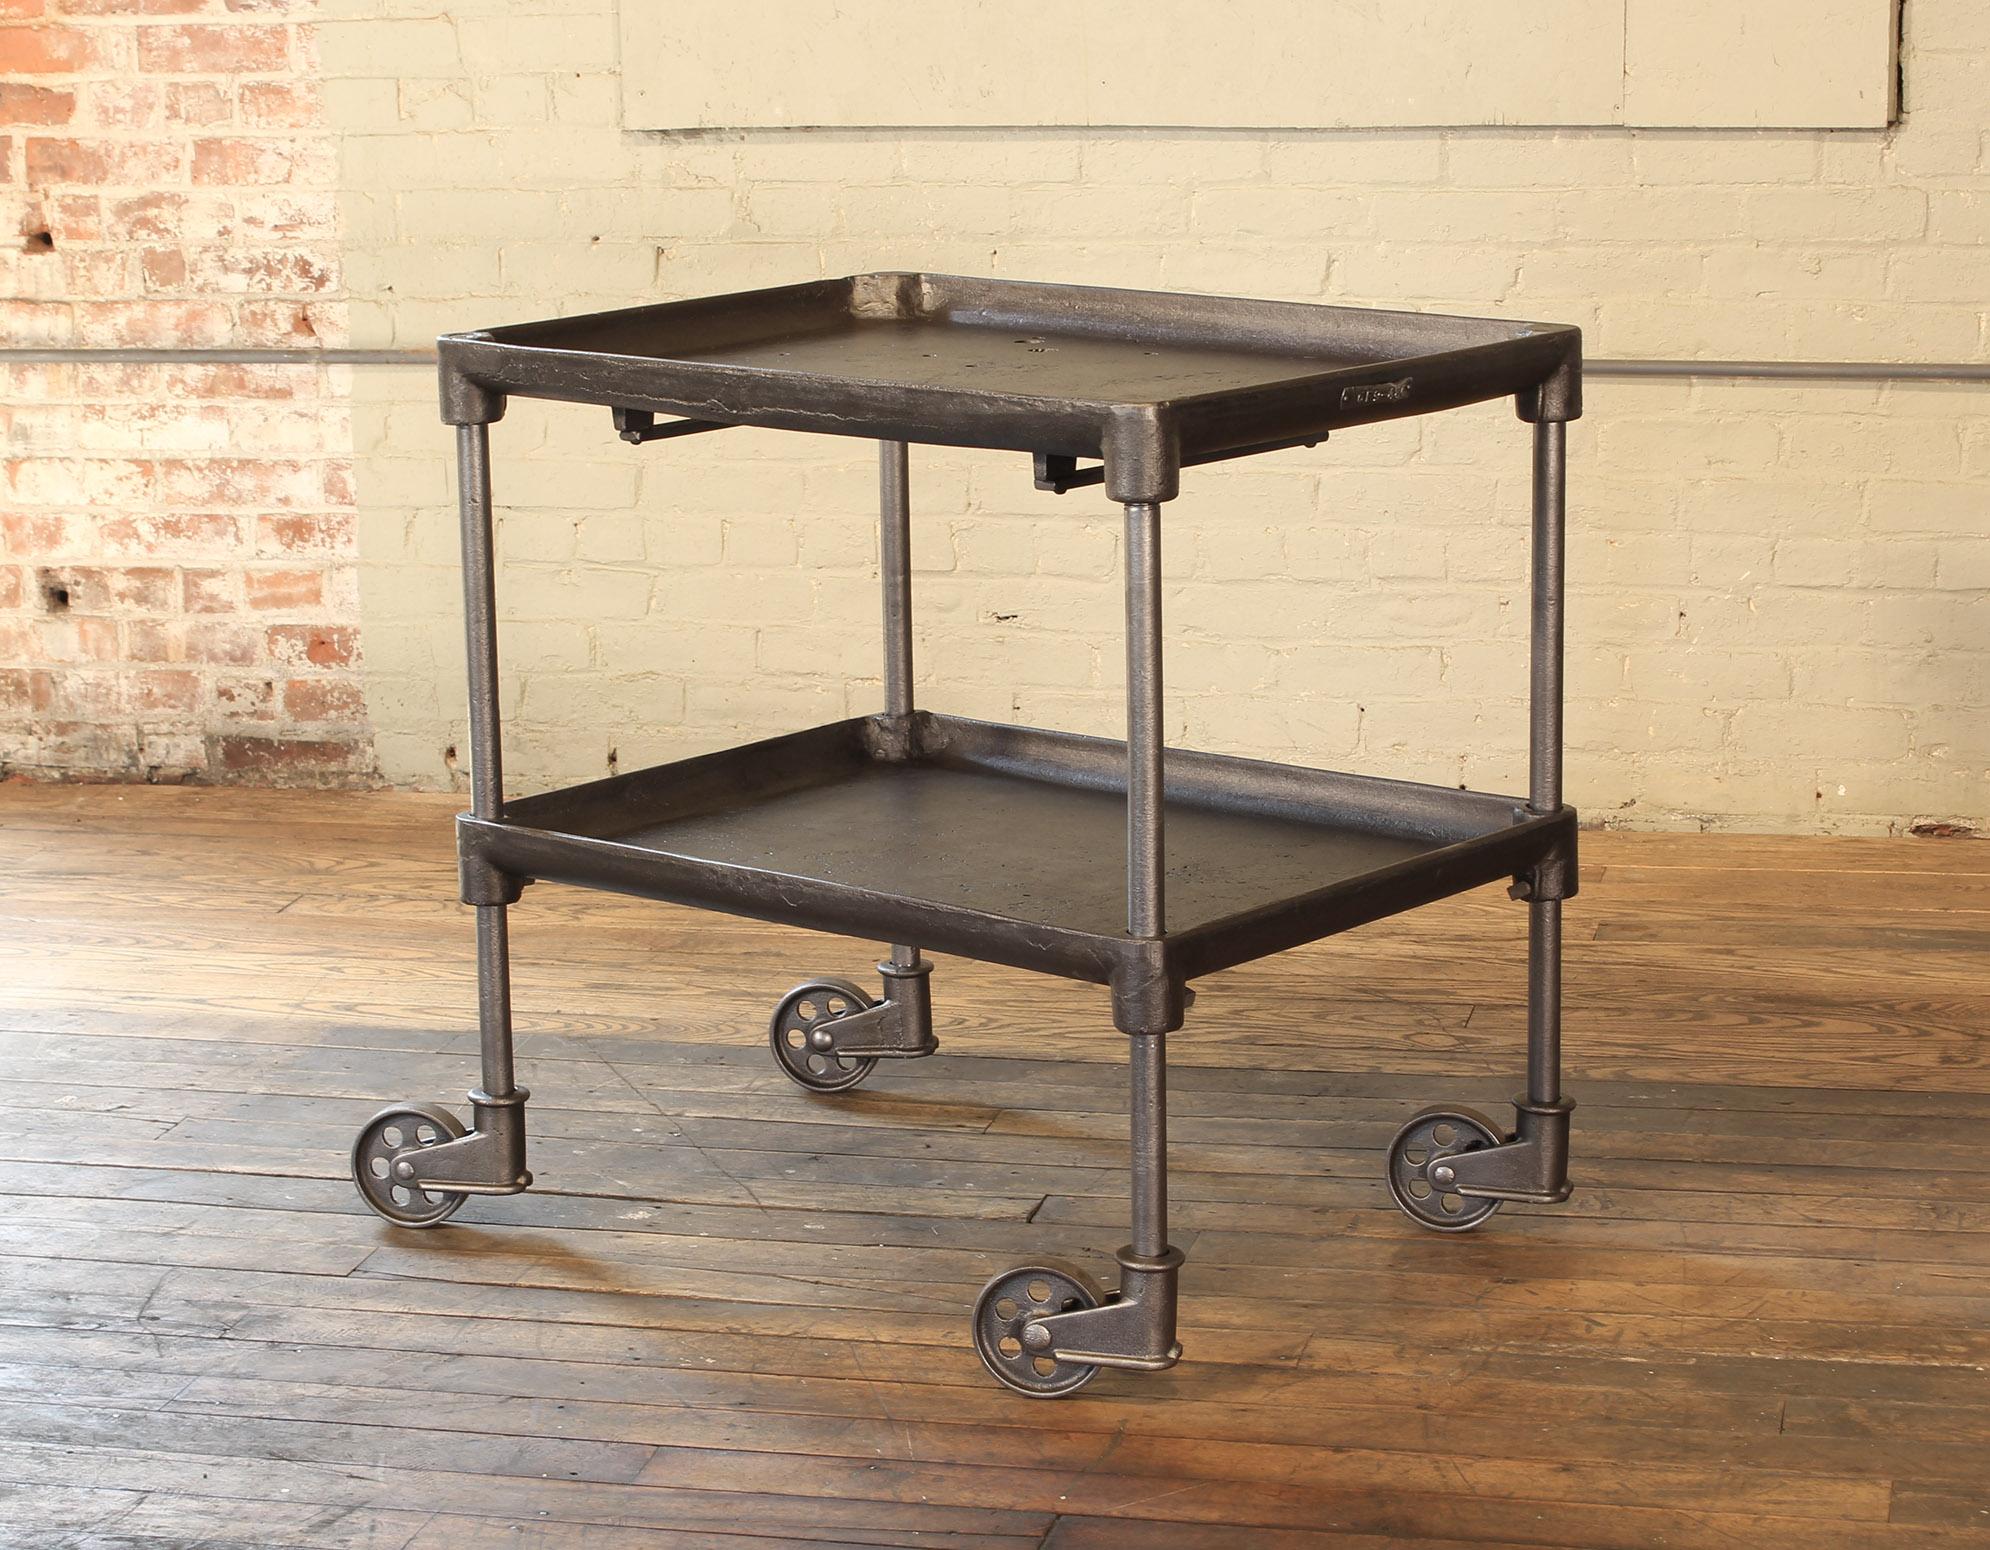 Authentic vintage industrial two-tier cast iron rolling tool / bar cart or side / end table. Features adjustable height shelf and four cast iron 4 1/2